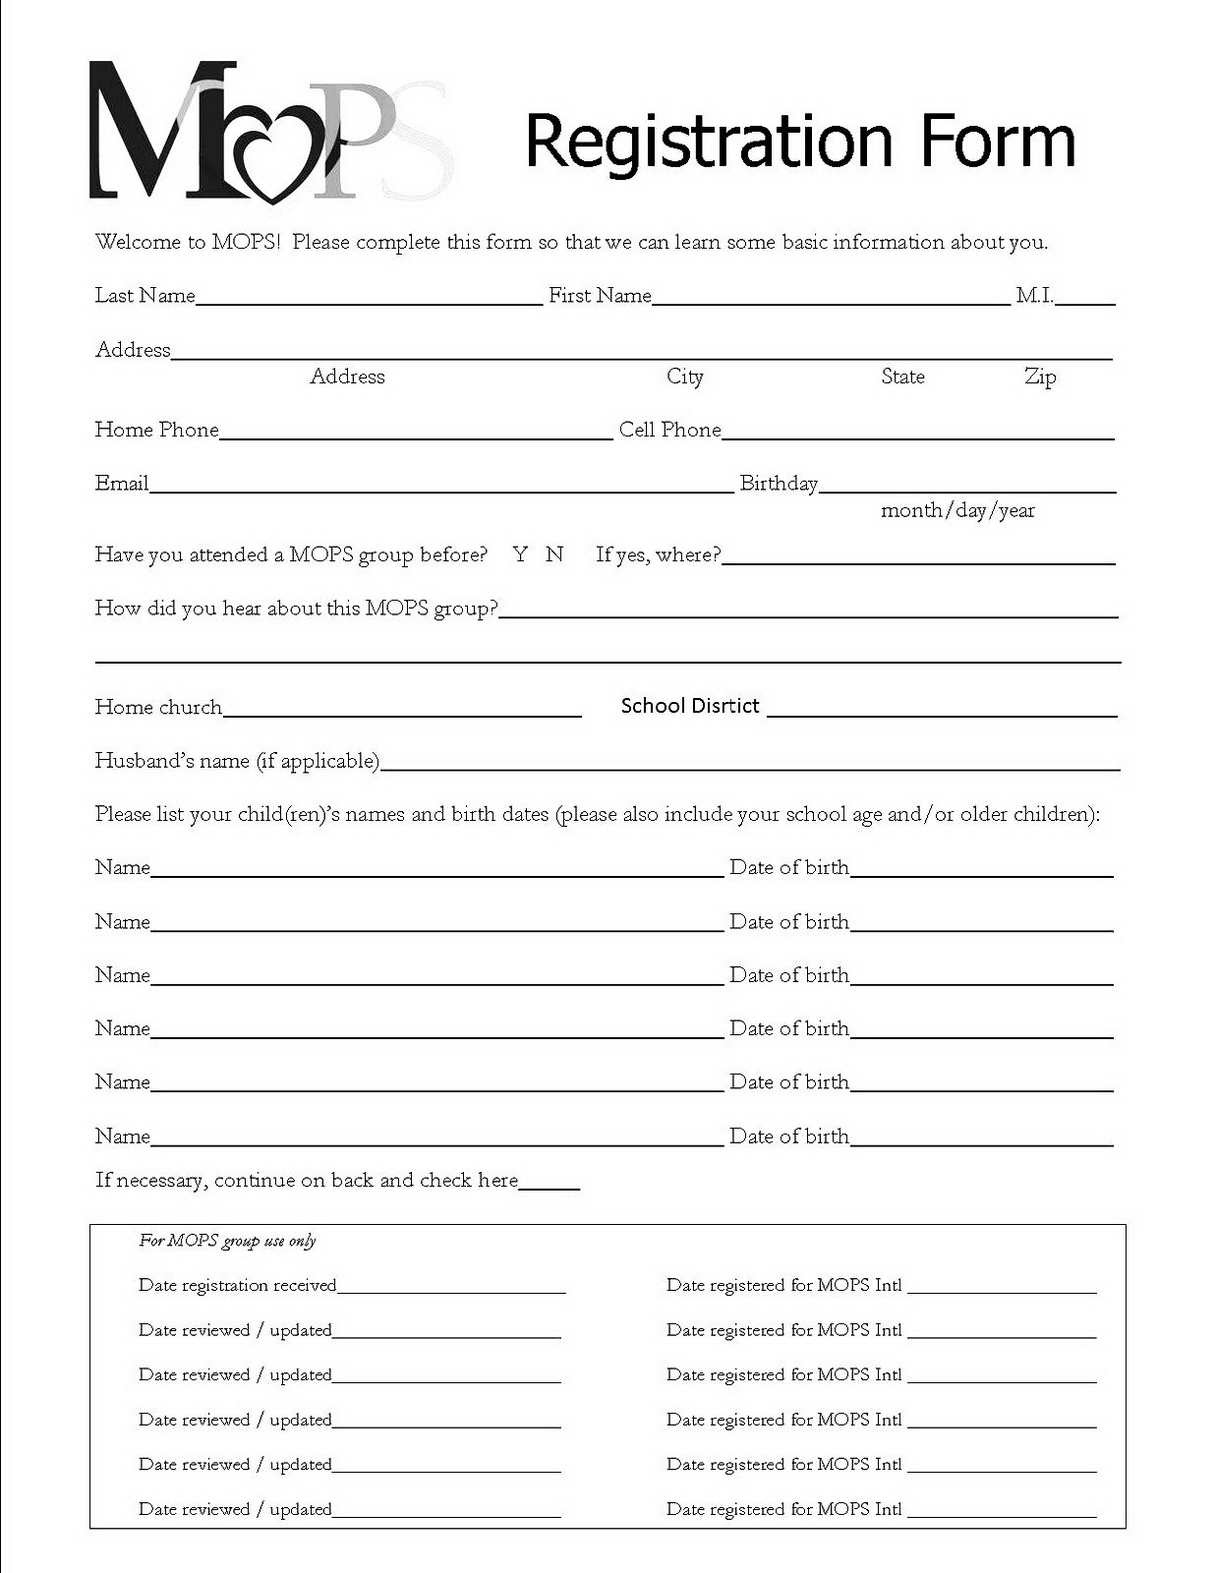 Registration Form Templates Free Download - Demir.iso-Consulting.co - Free Printable Membership Forms